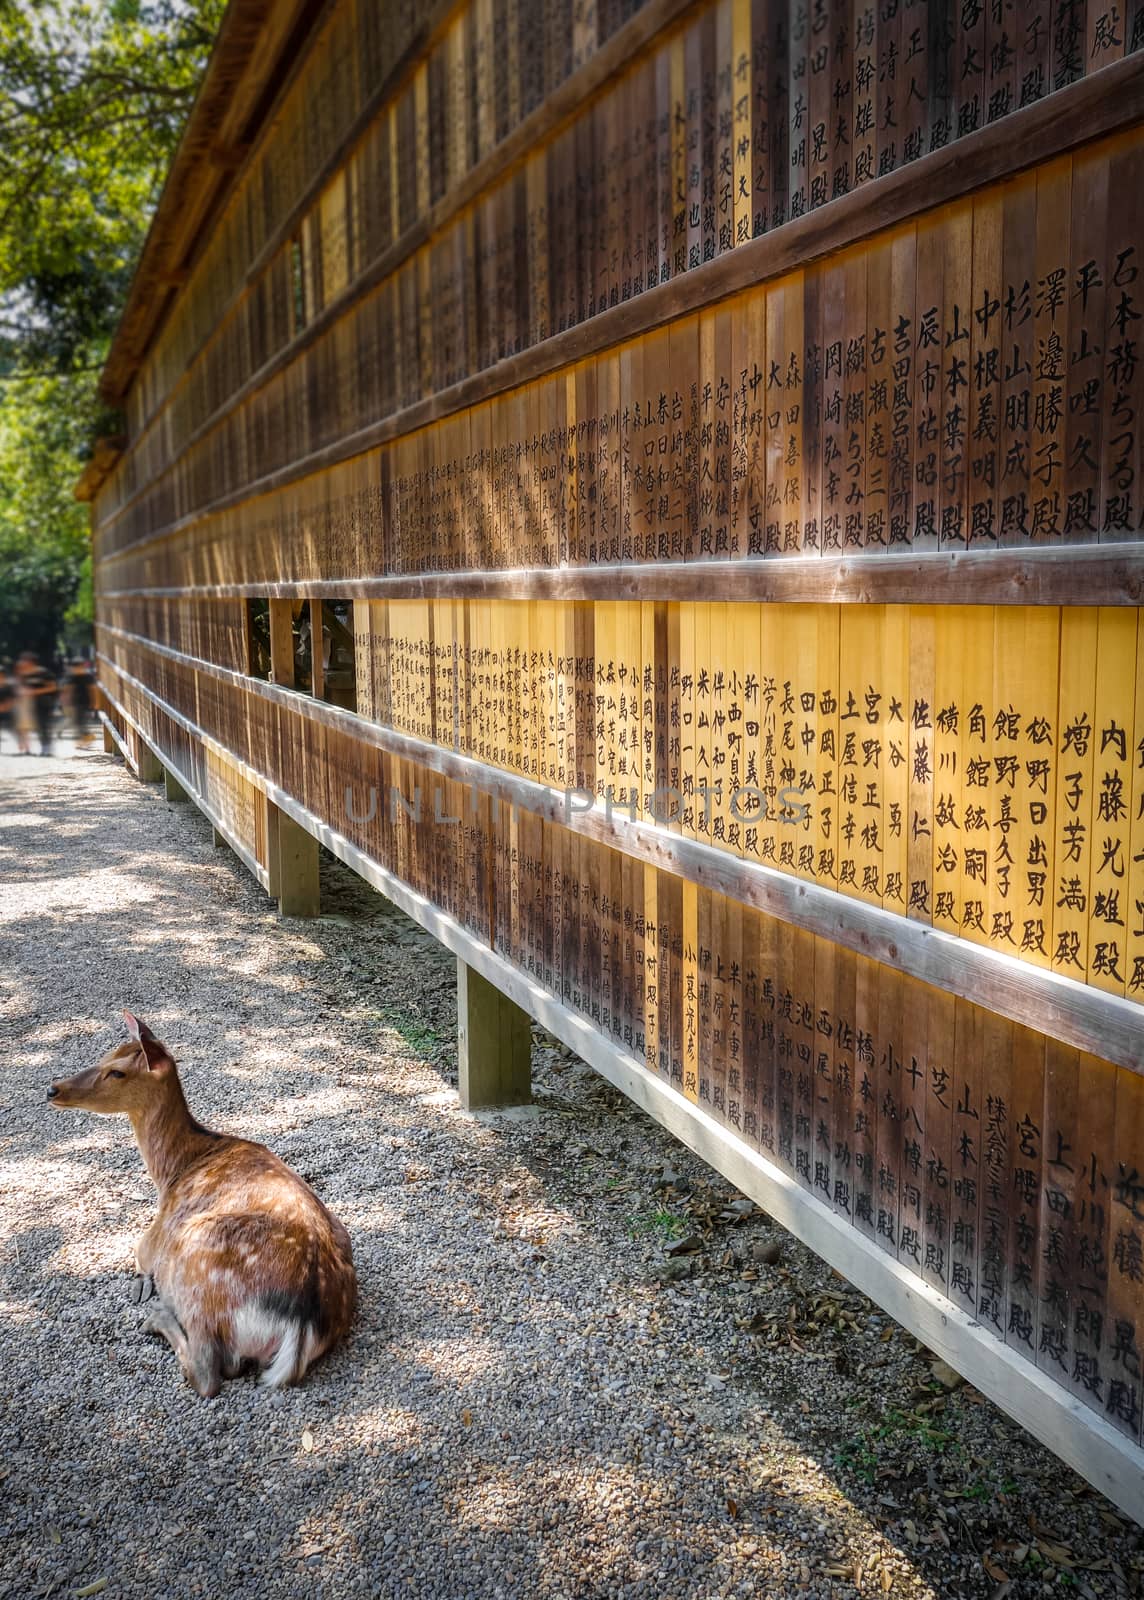 Deer in front of Wooden tablets, Nara, Japan by daboost